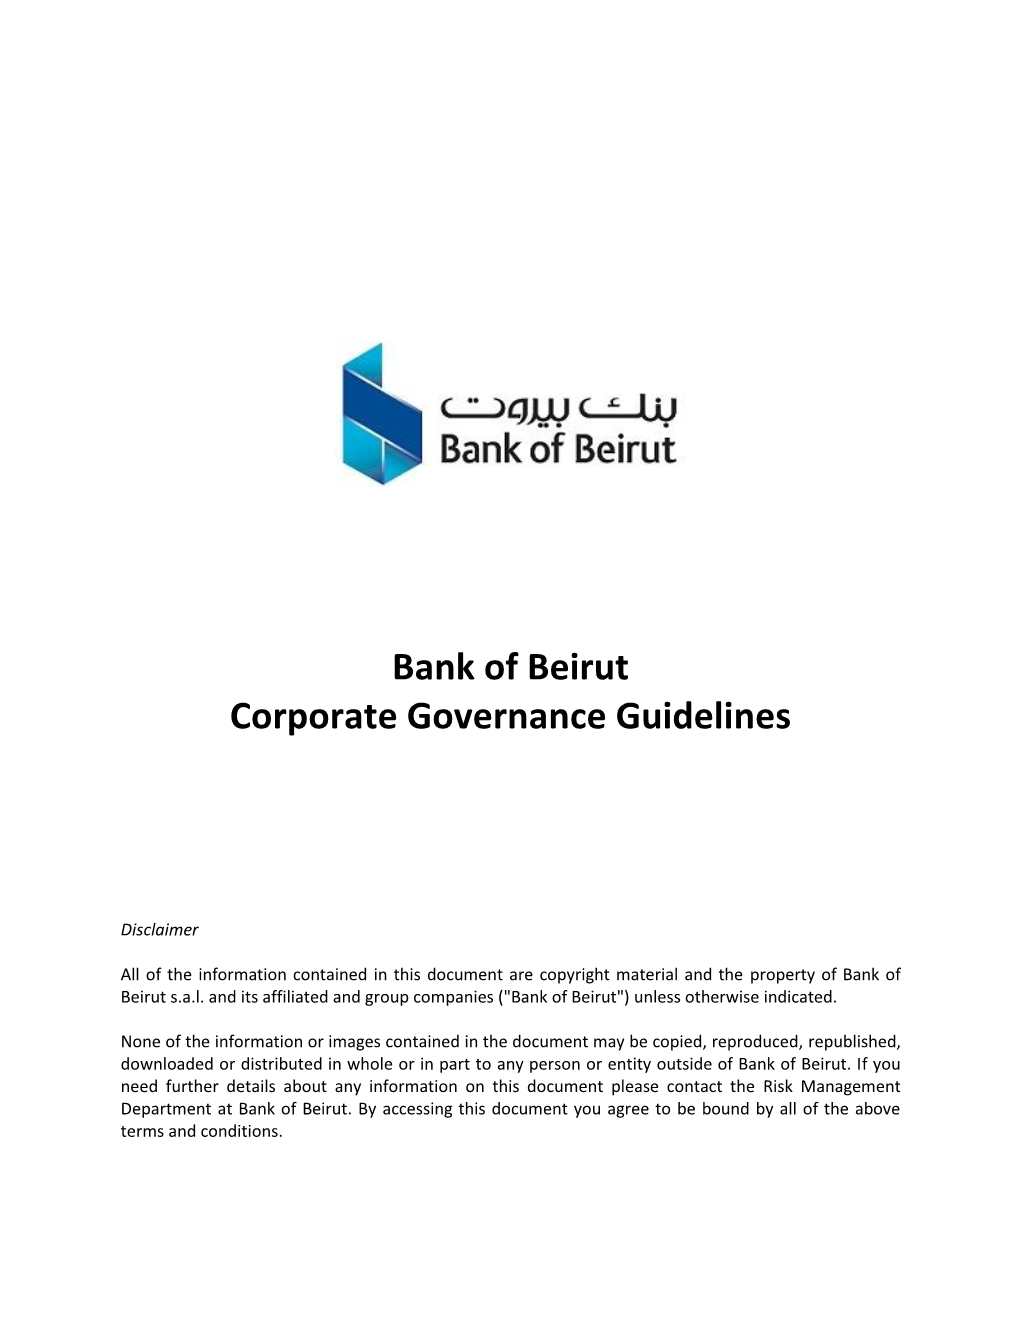 Bank of Beirut Corporate Governance Guidelines